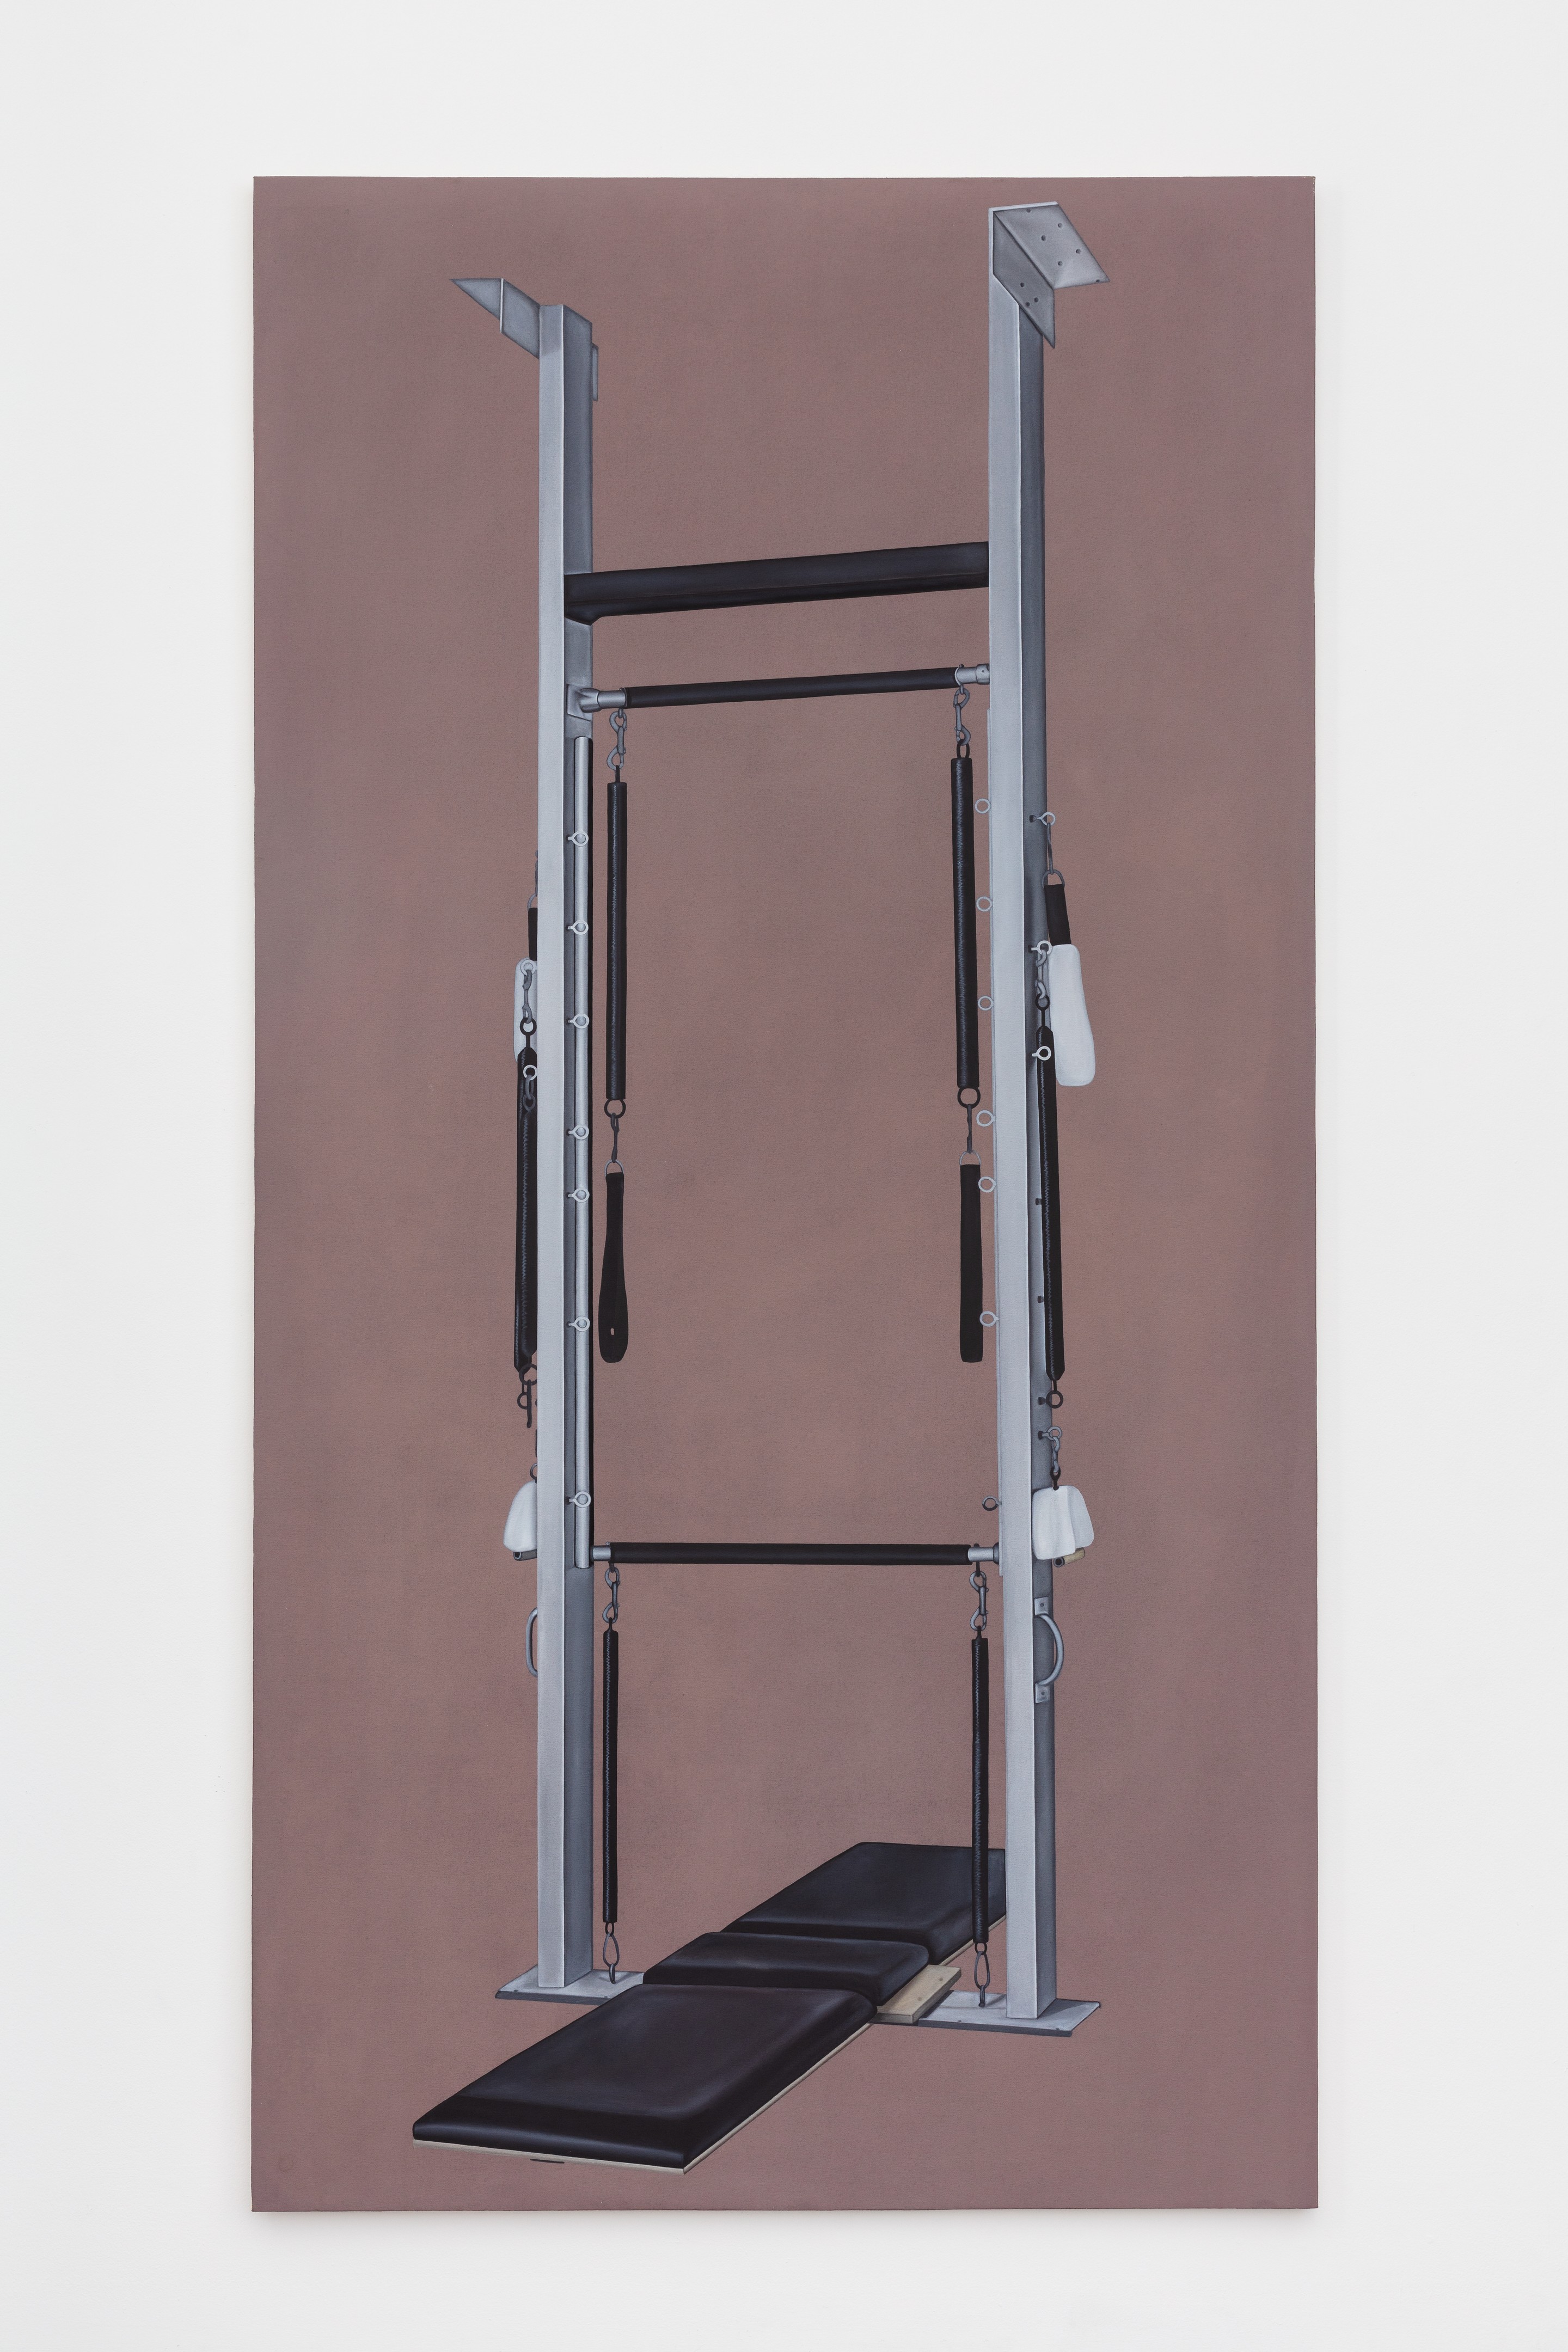 Guillotine (2021)

Oil on canvas on Styrofoam

90.5h x 47.25w inches (230h x 120w cm)